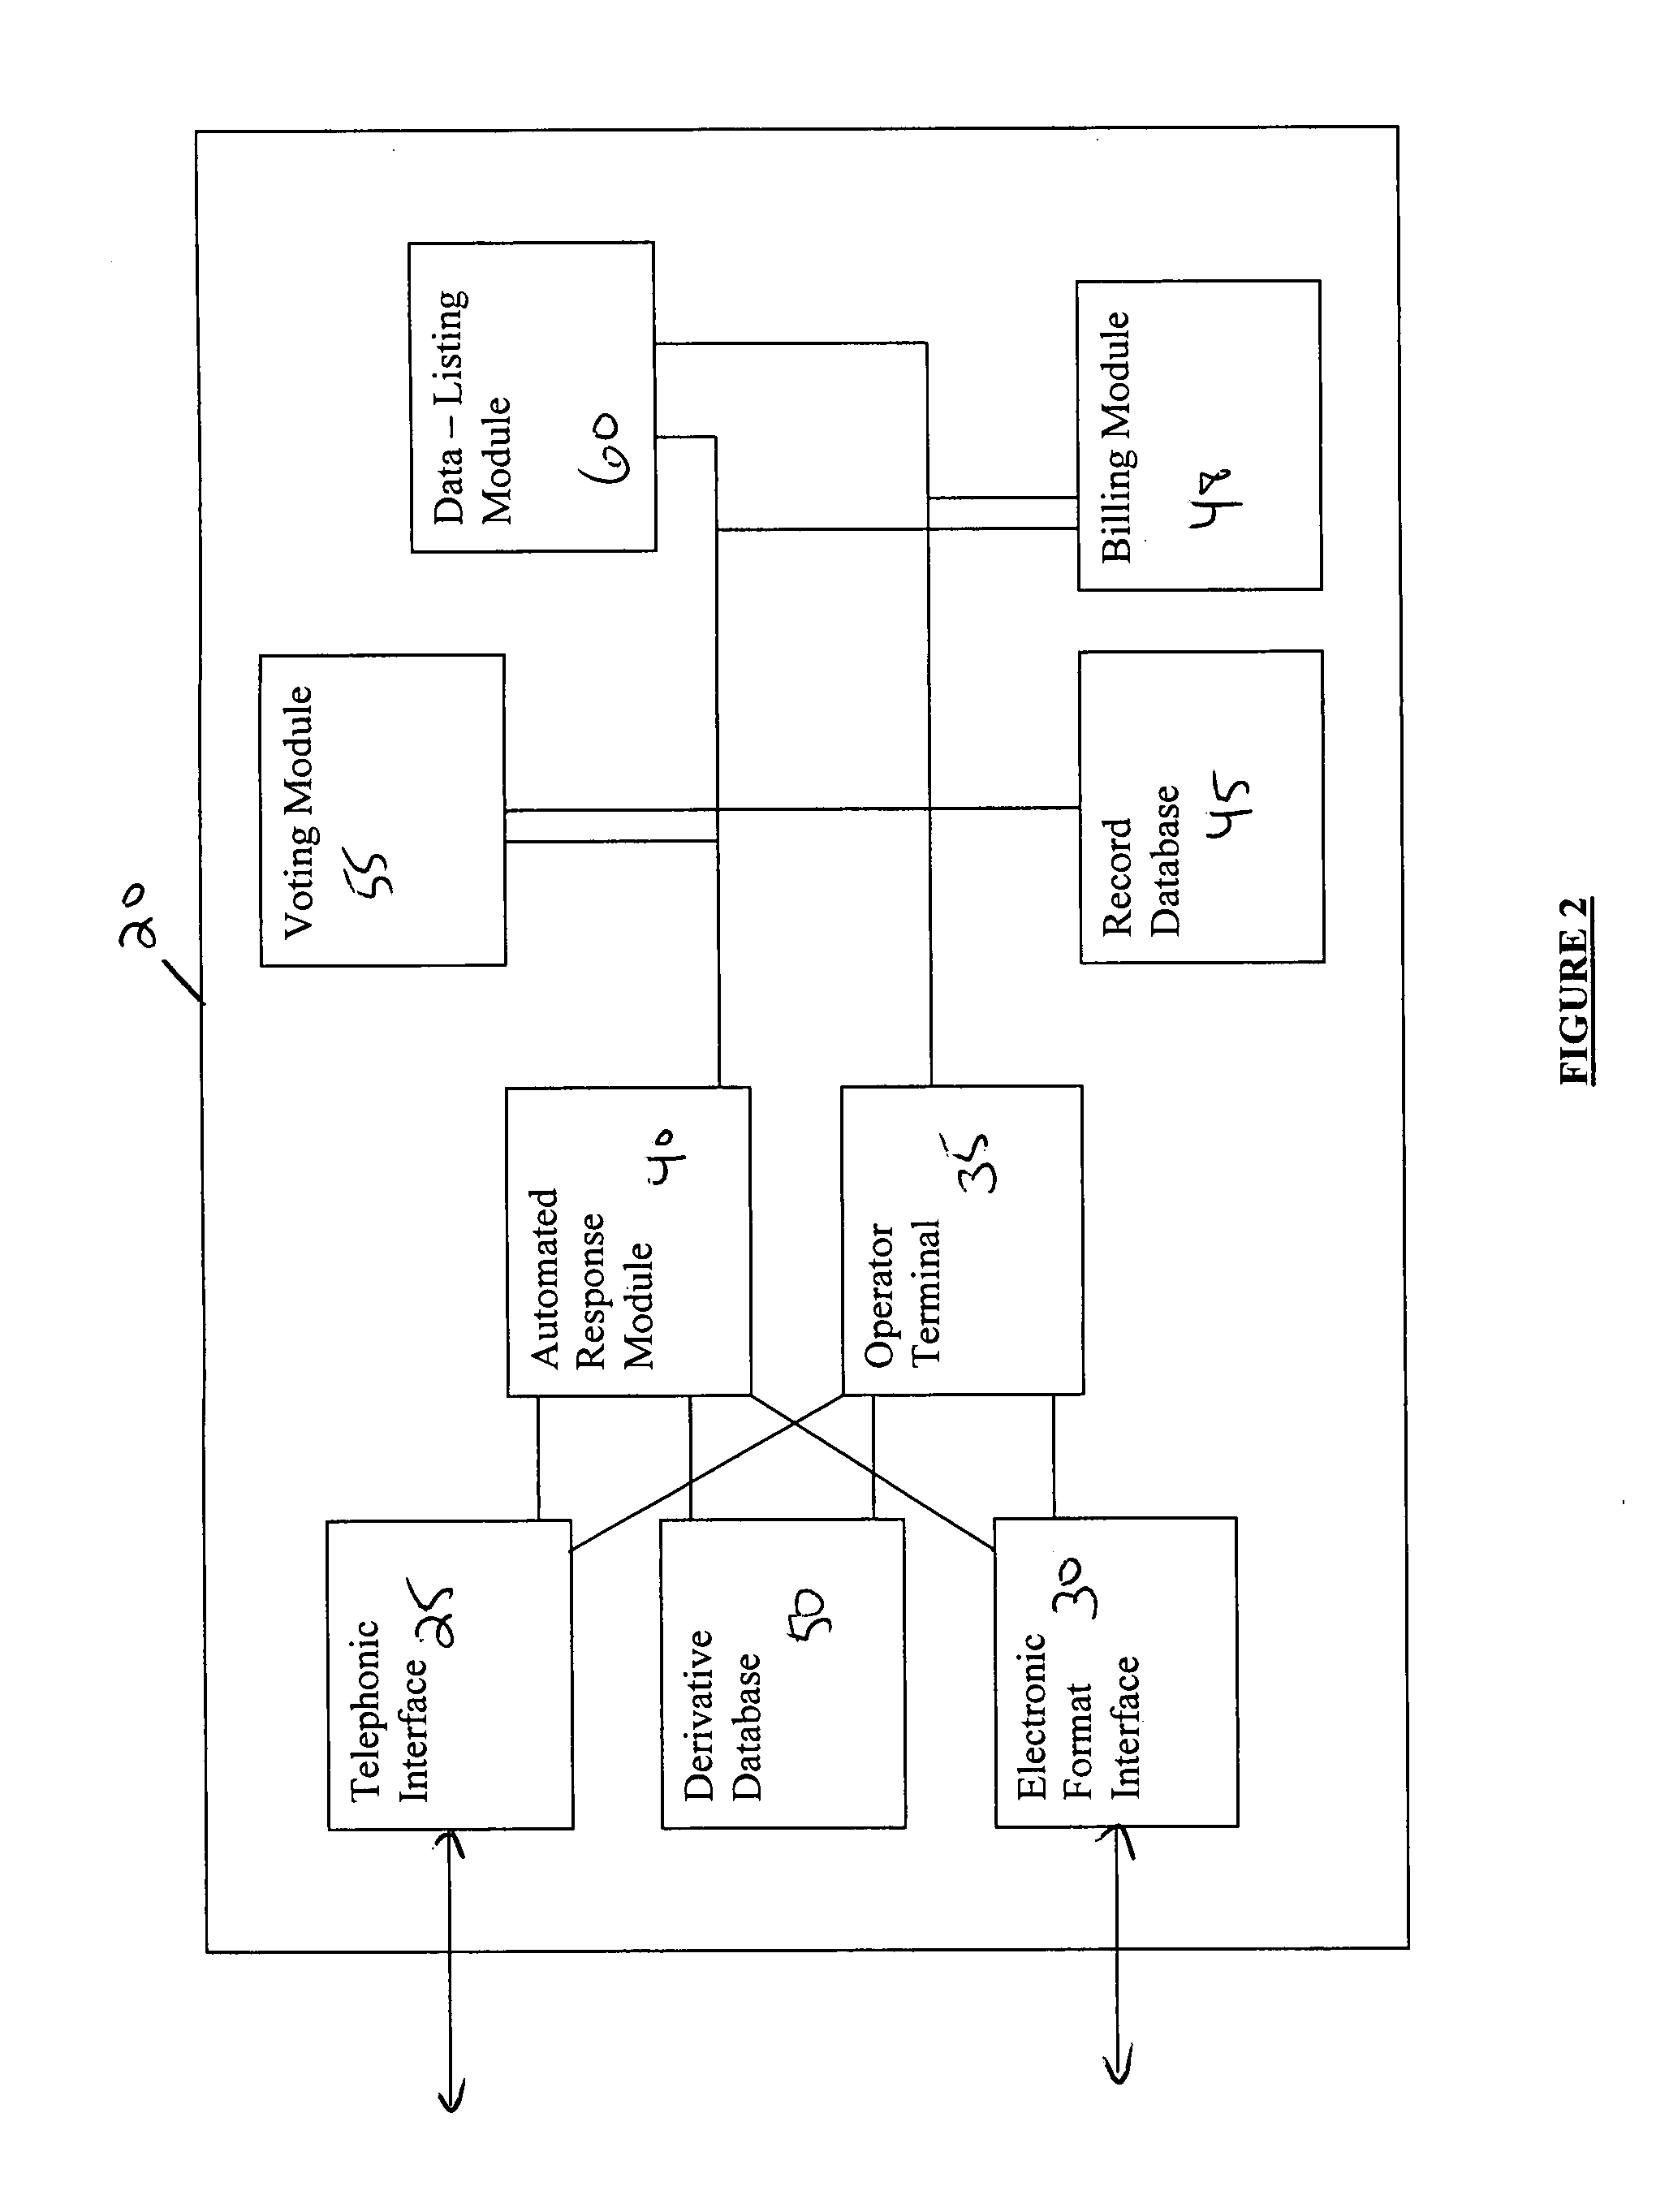 System and method for providing mobile device services using SMS communications